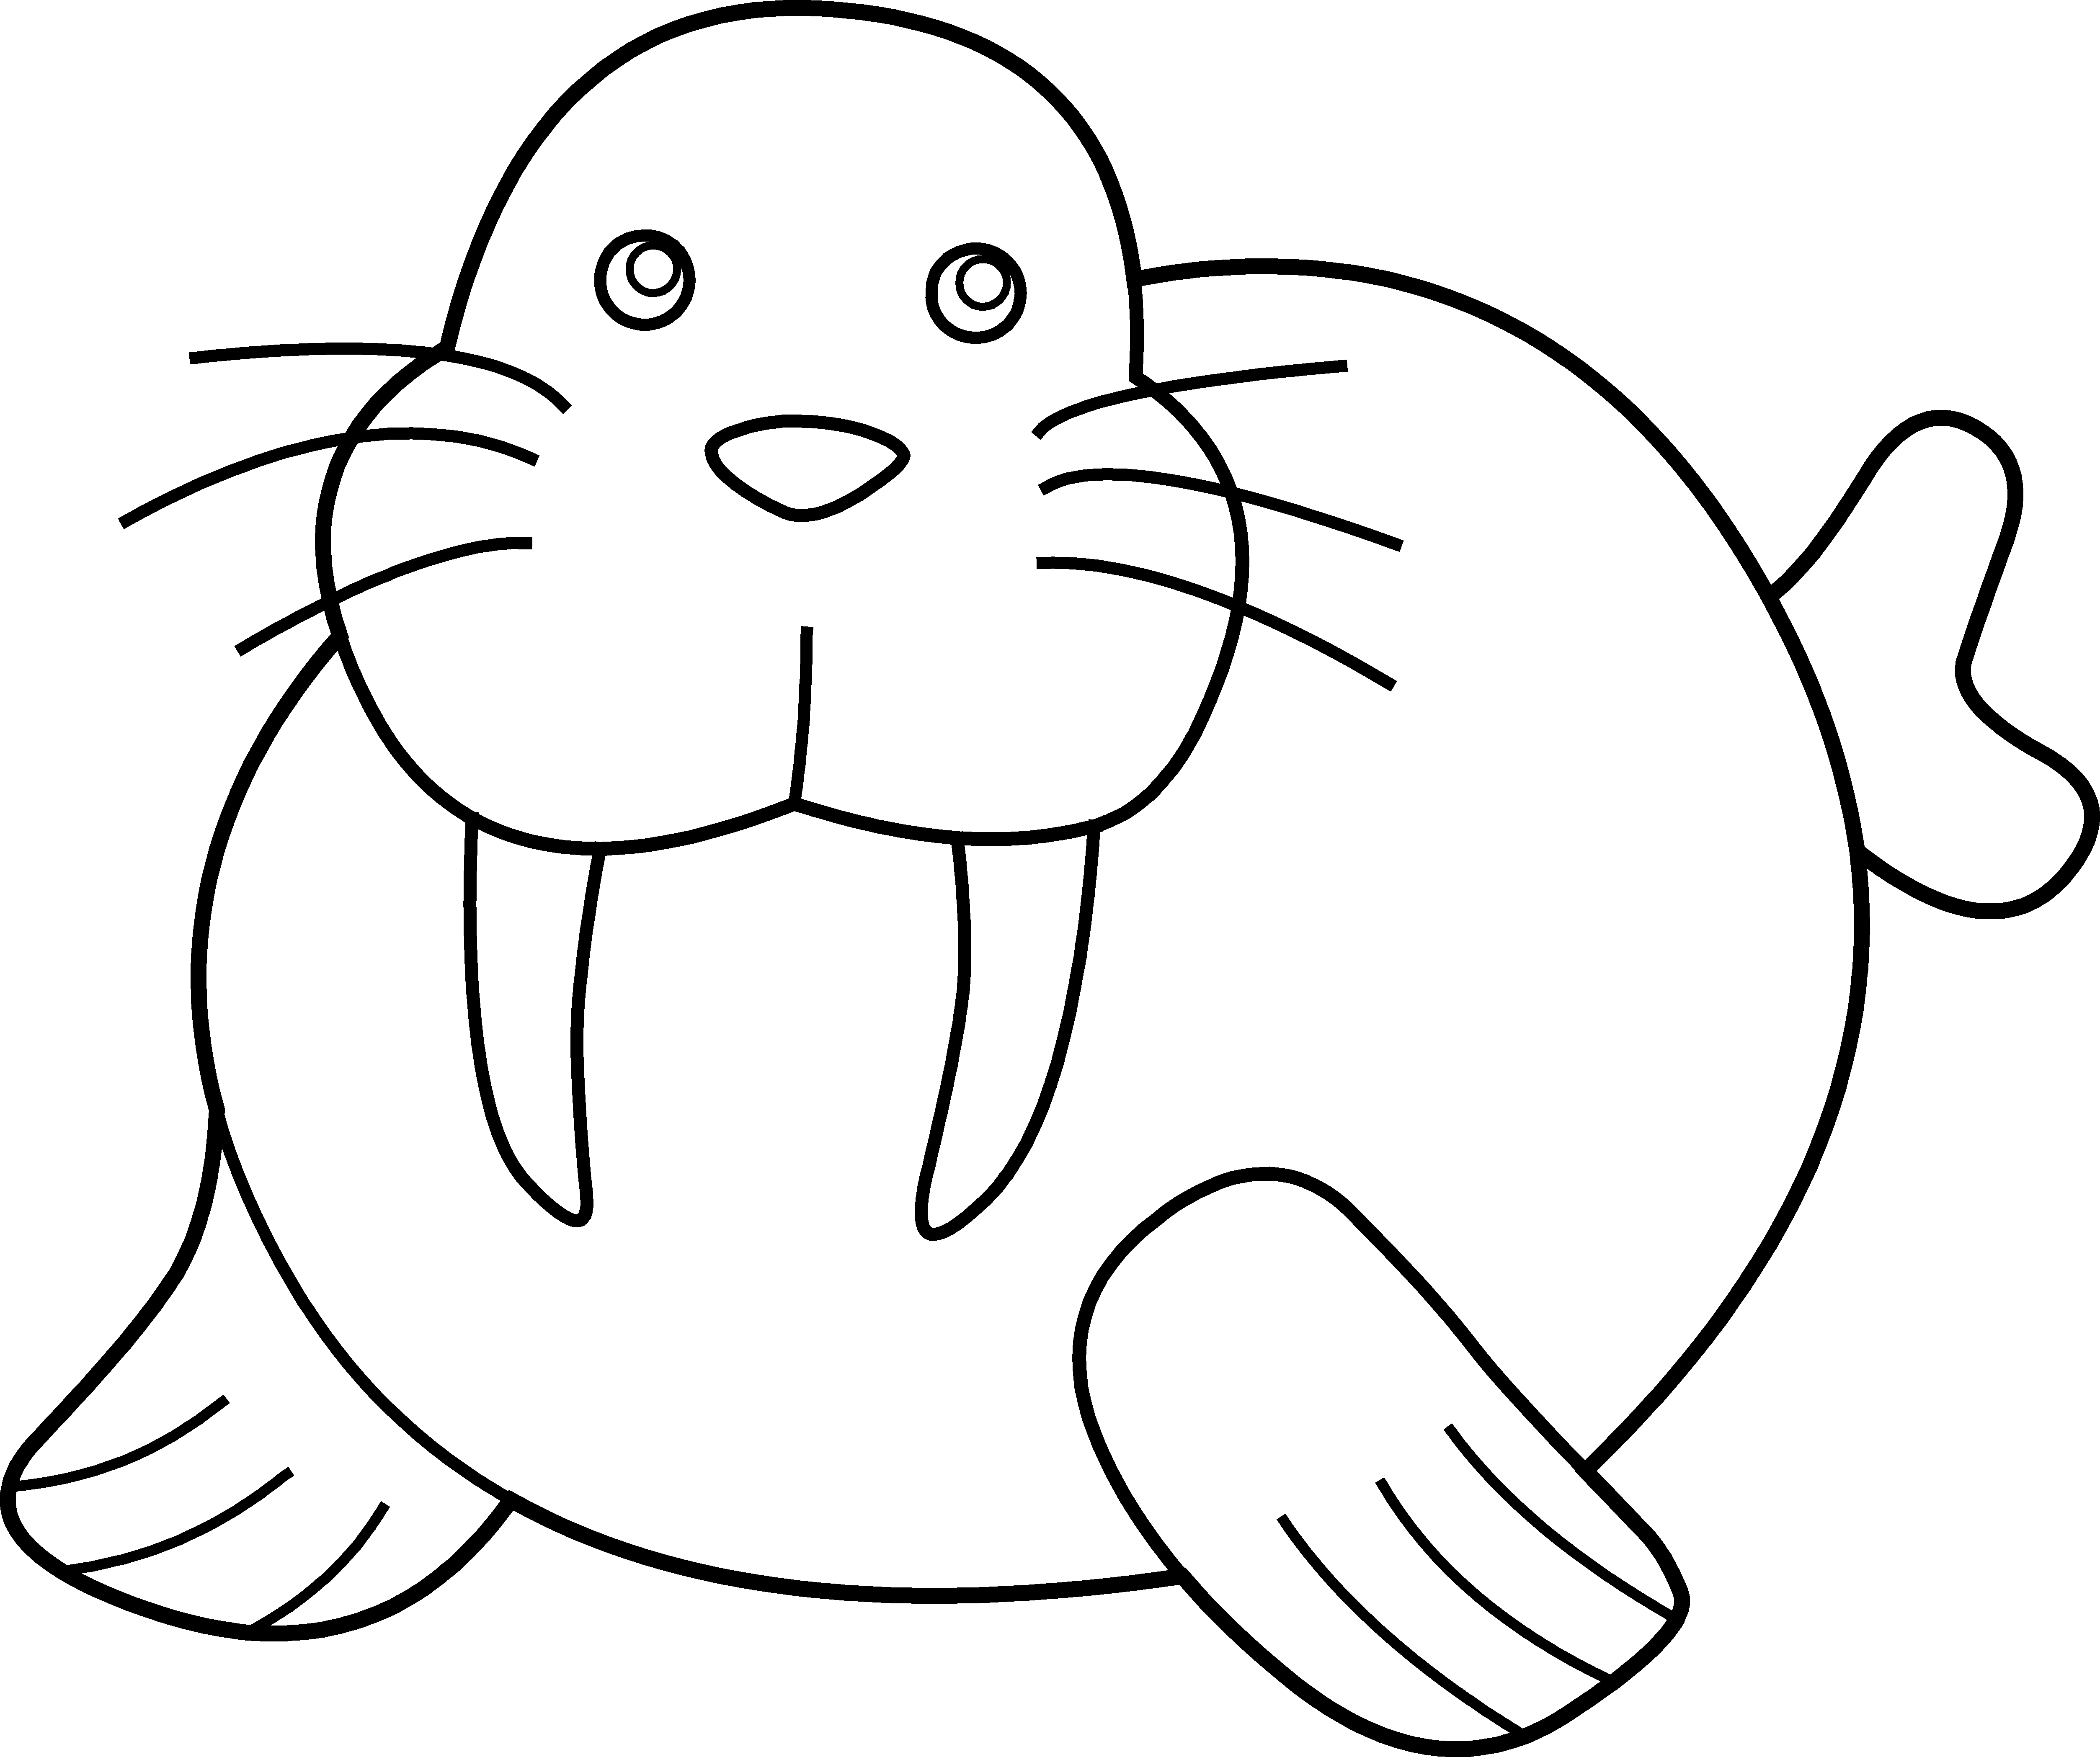 Ocean black and white. Walrus clipart swimming